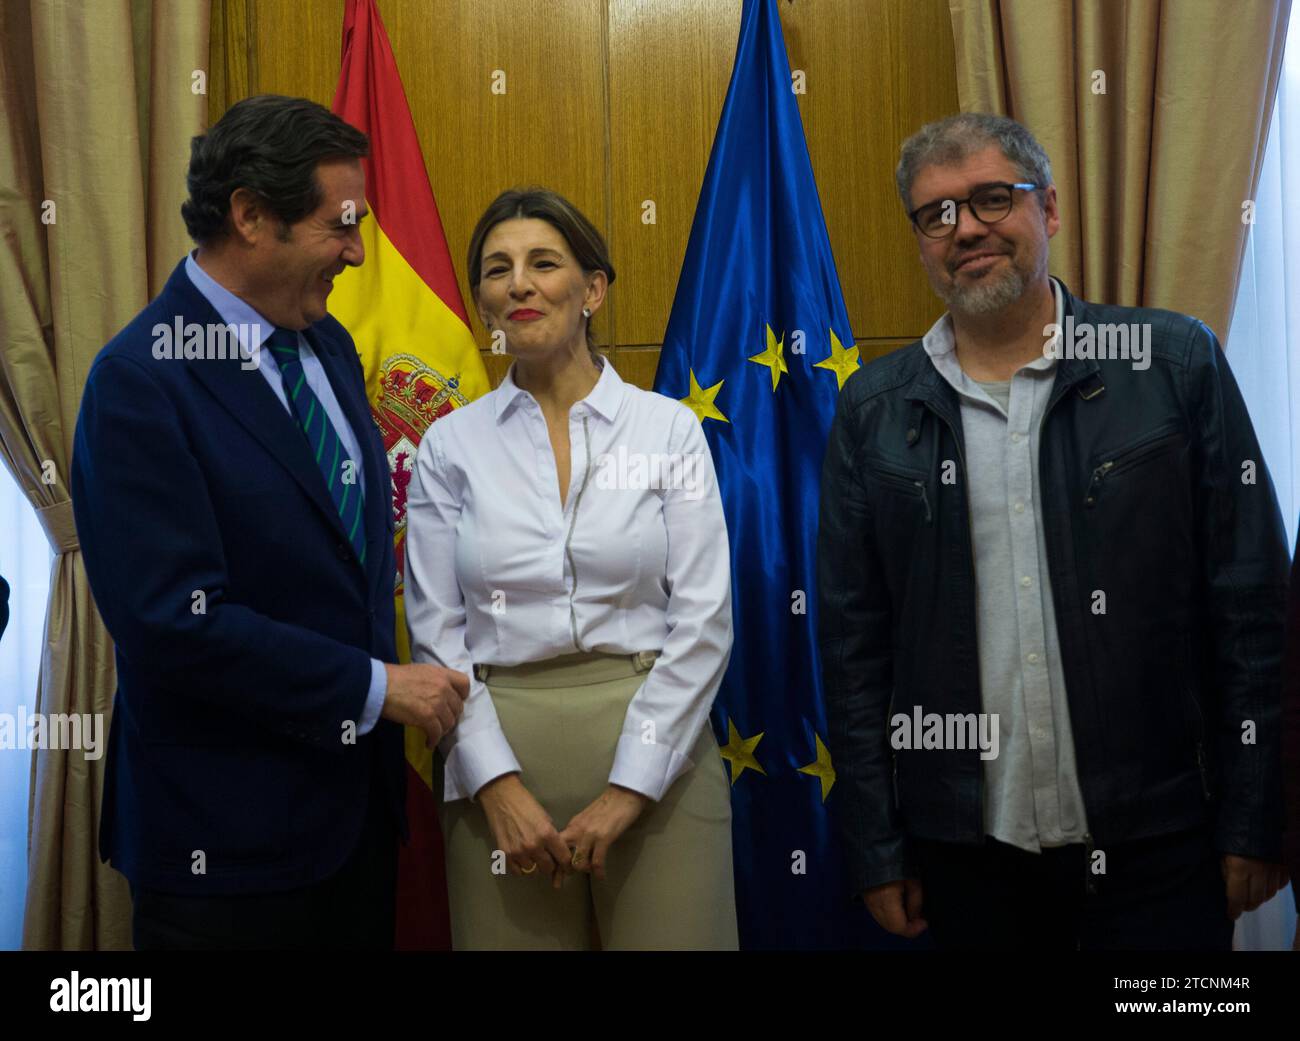 Madrid, 01/22/2020. The new Minister of Labor and Social Economy, Yolanda Díaz, meets with the leaders of the majority unions, CC.OO. and UGT, and with those of CEOE. Photo: Ángel de Antonio. ARCHDC. Credit: Album / Archivo ABC / Ángel de Antonio Stock Photo